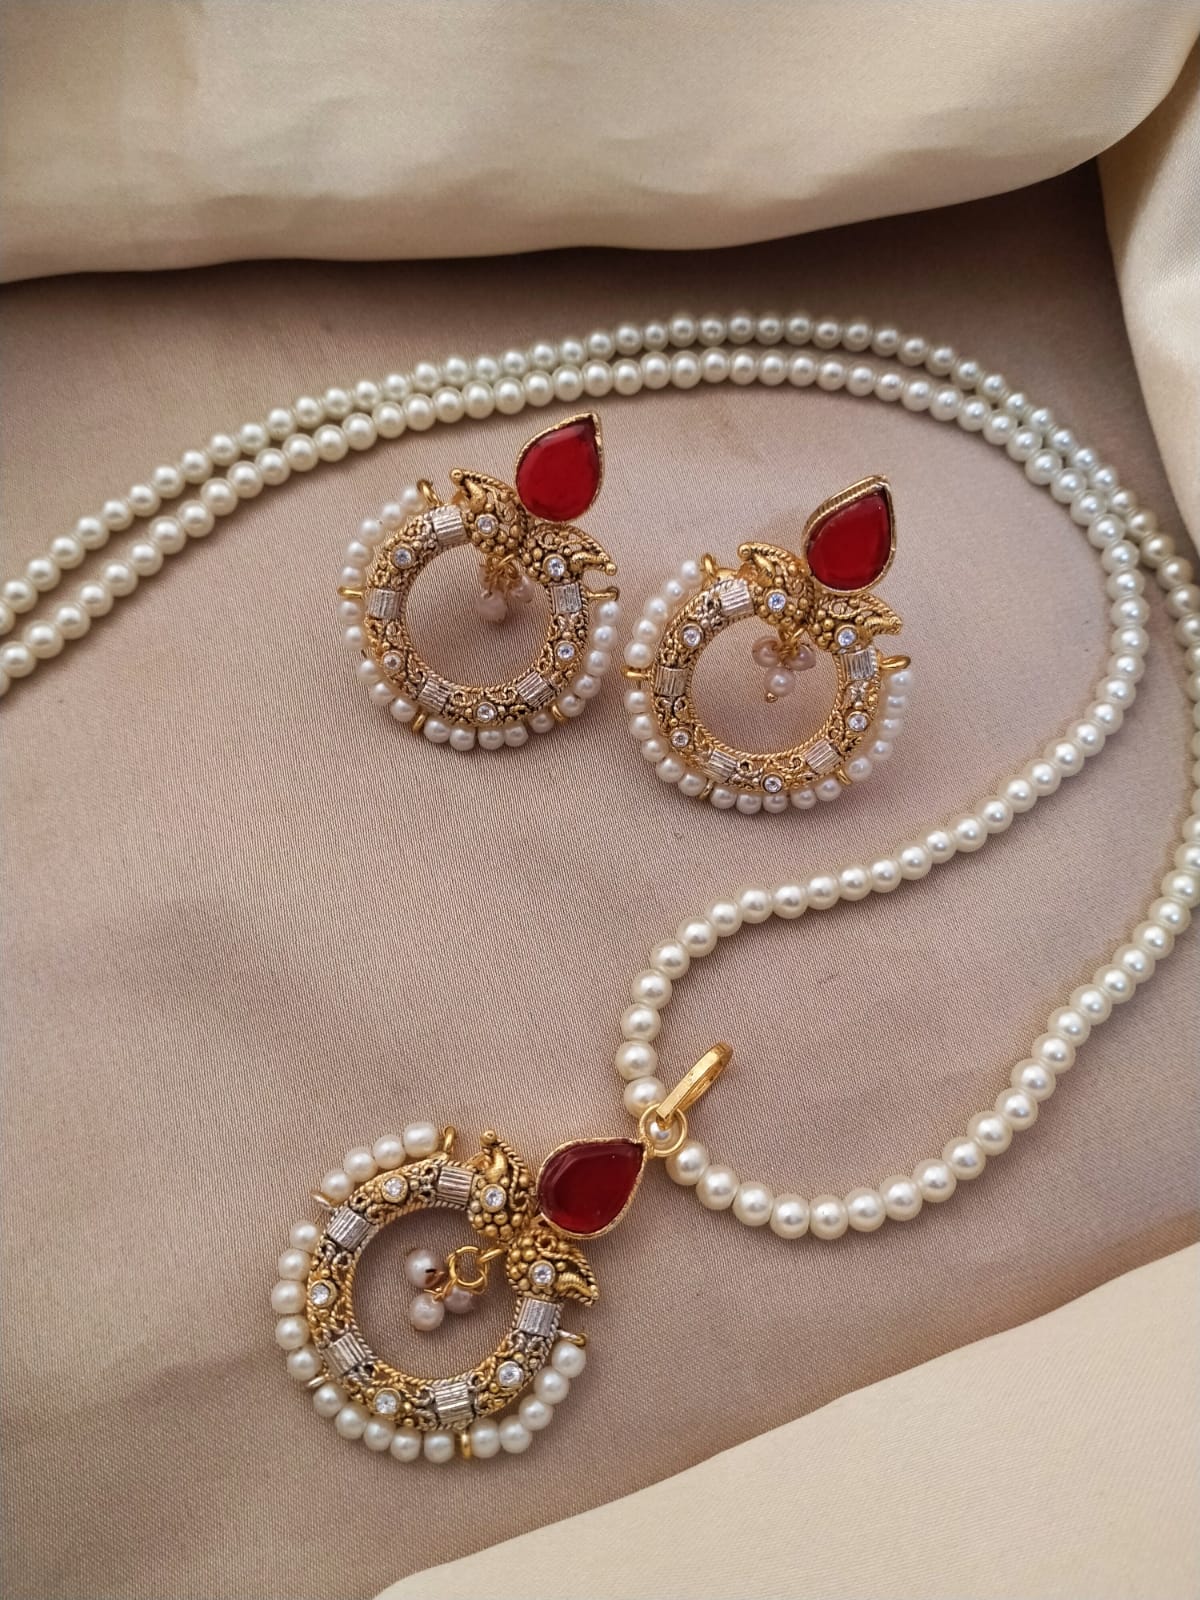 Fashionable and trendy traditional Earrings | Pendant necklace set